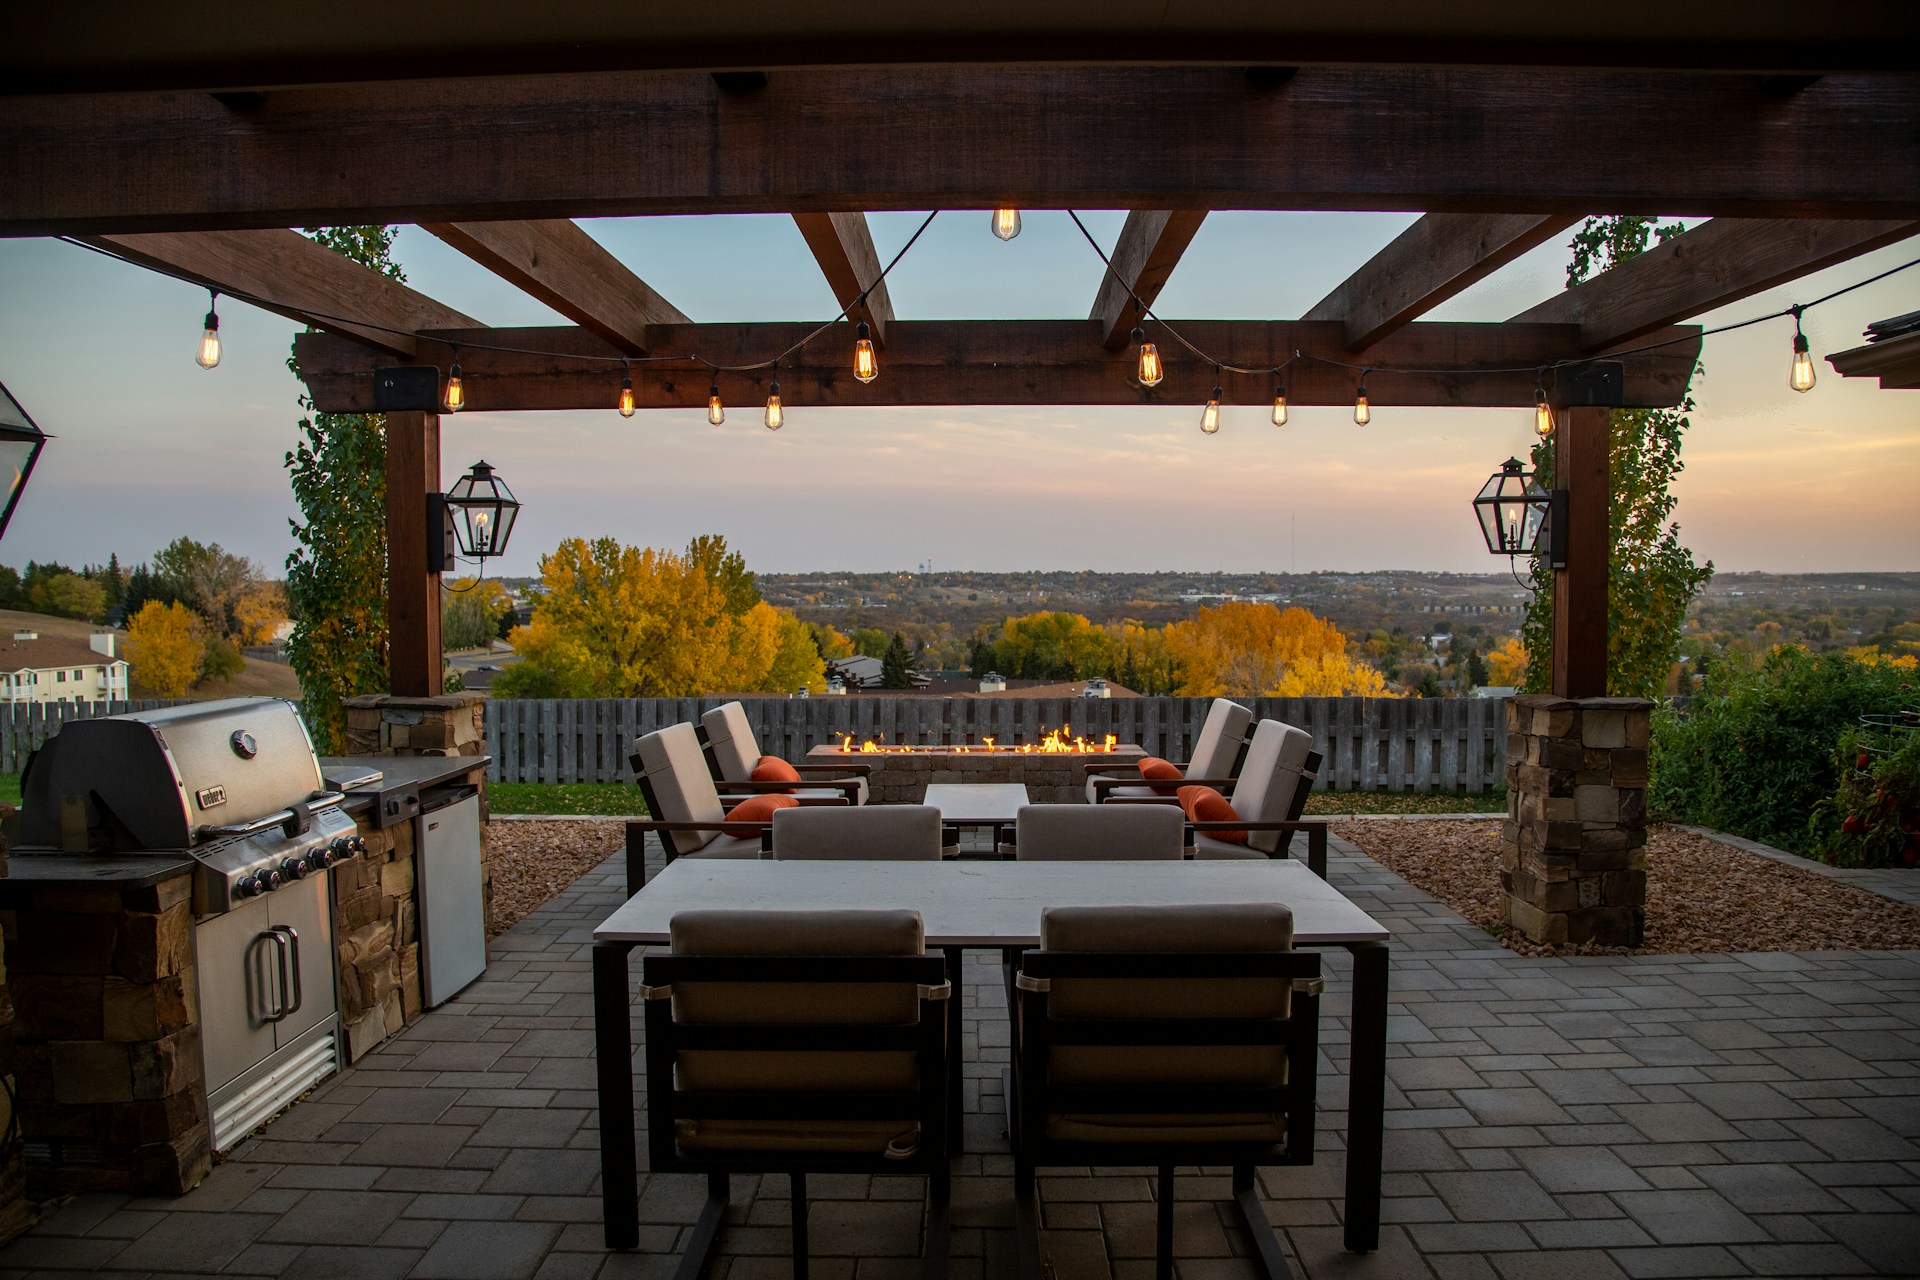 pergola covering an outdoor kitchen